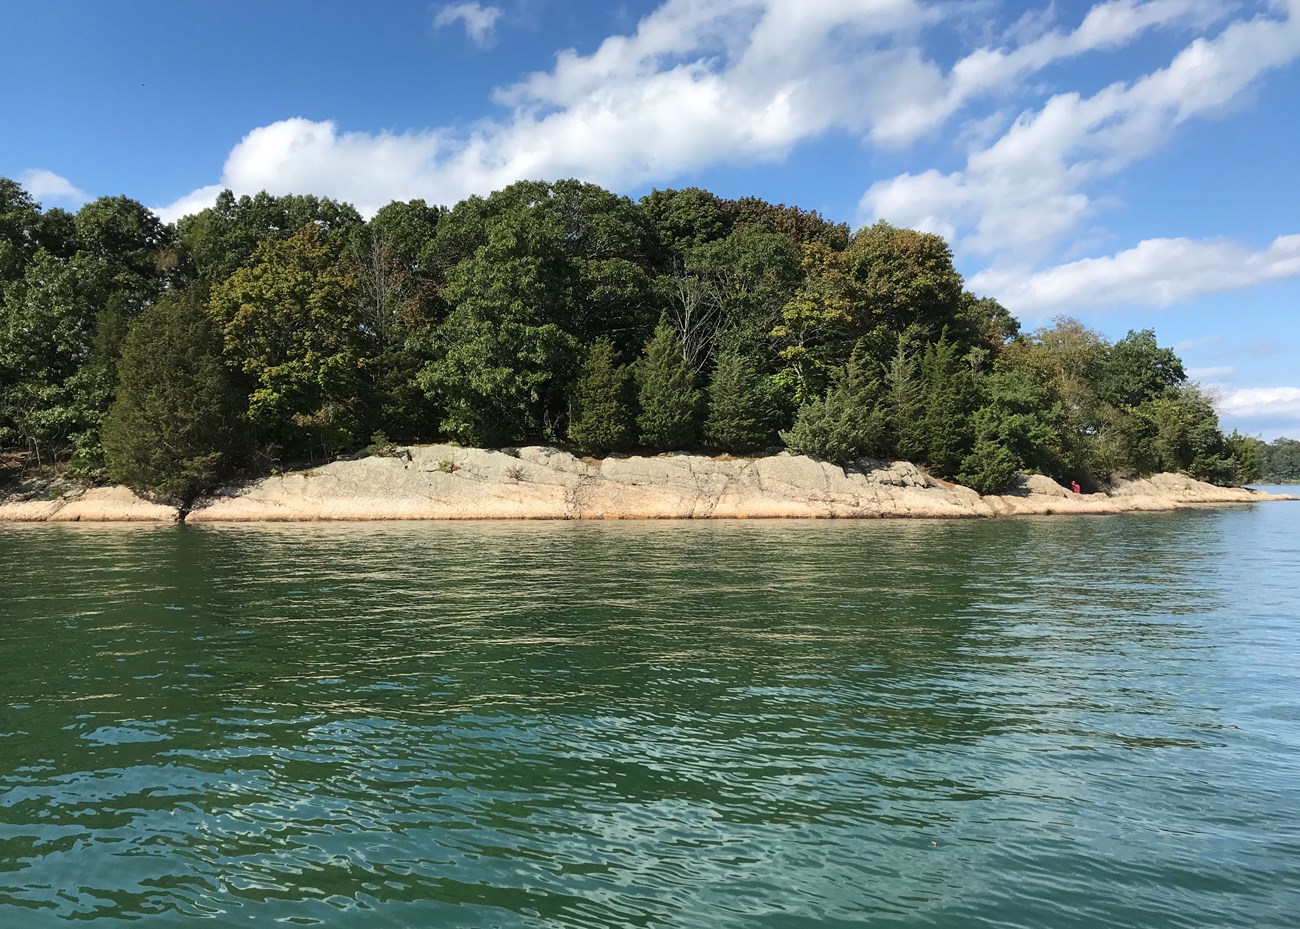 view from the water of an island dense with trees and shrubs.